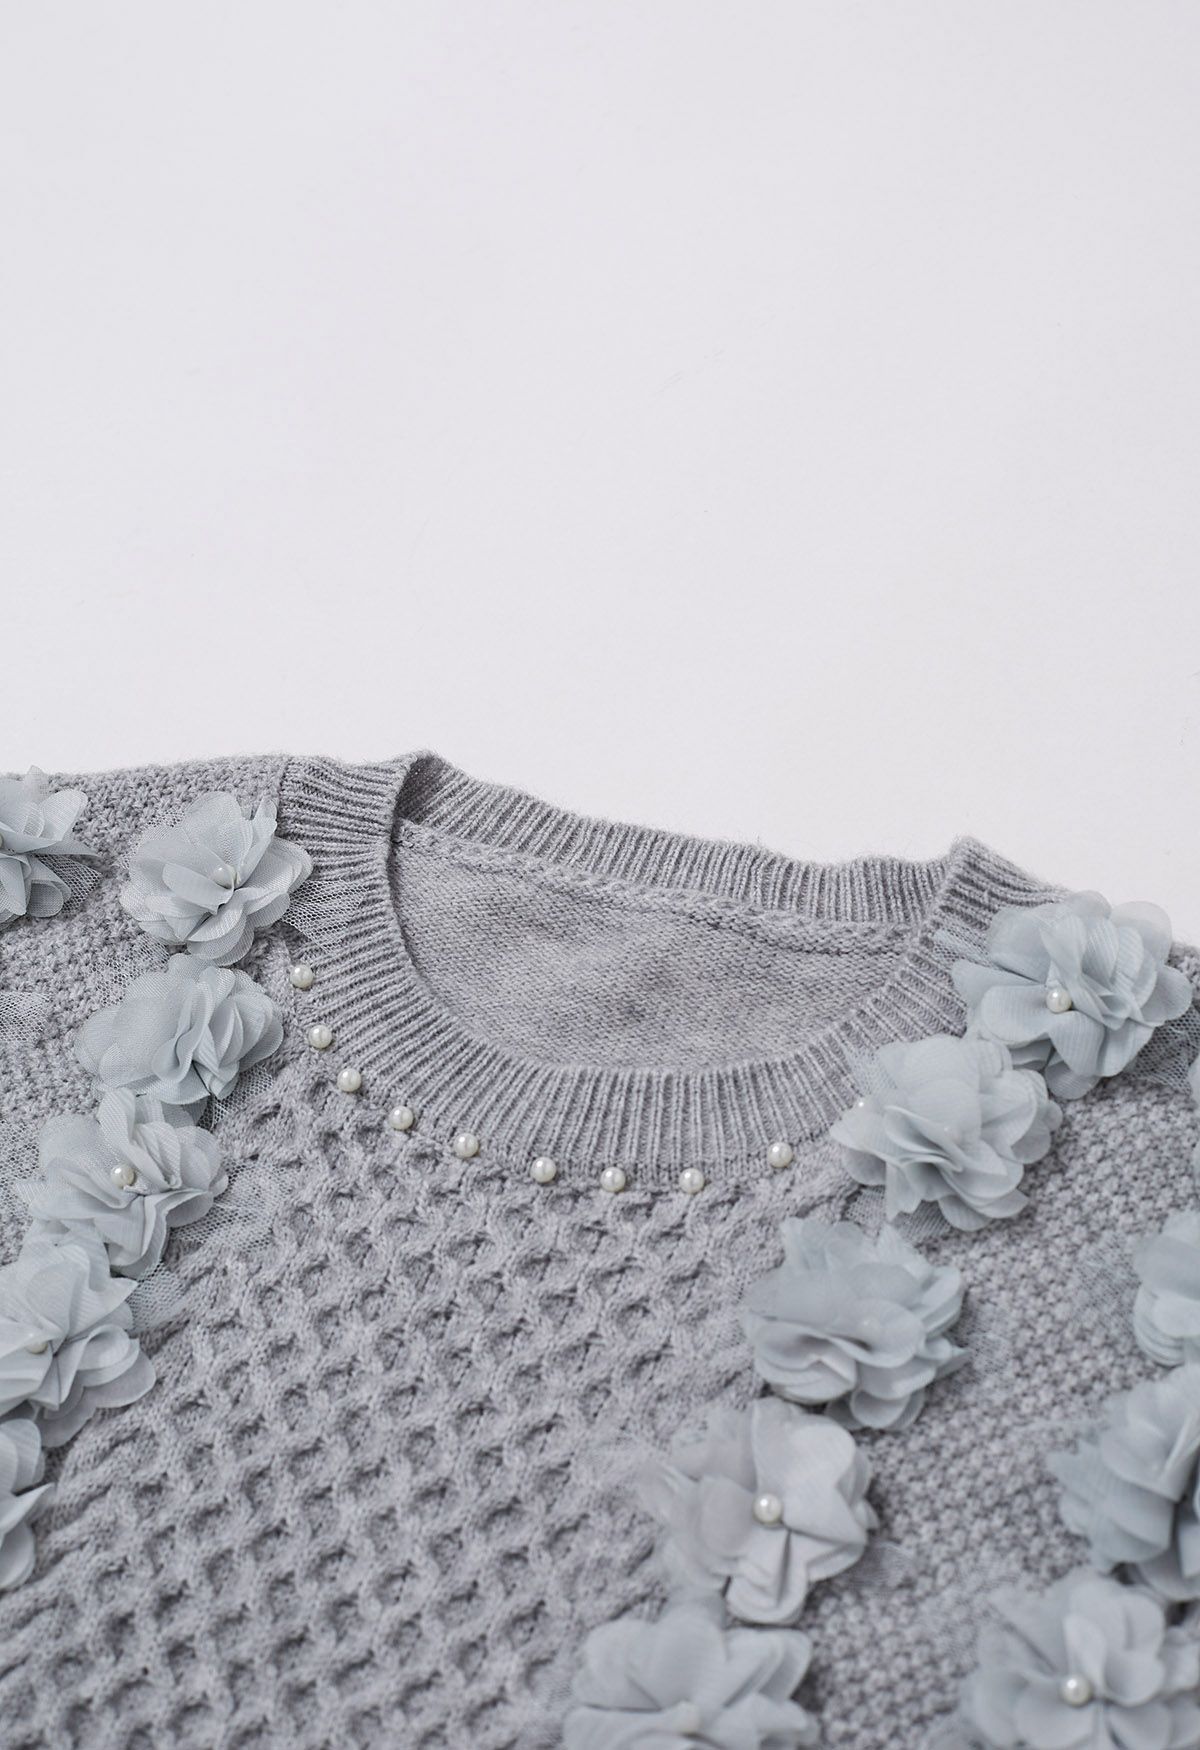 3D Flower Pearly Knit Sweater in Grey